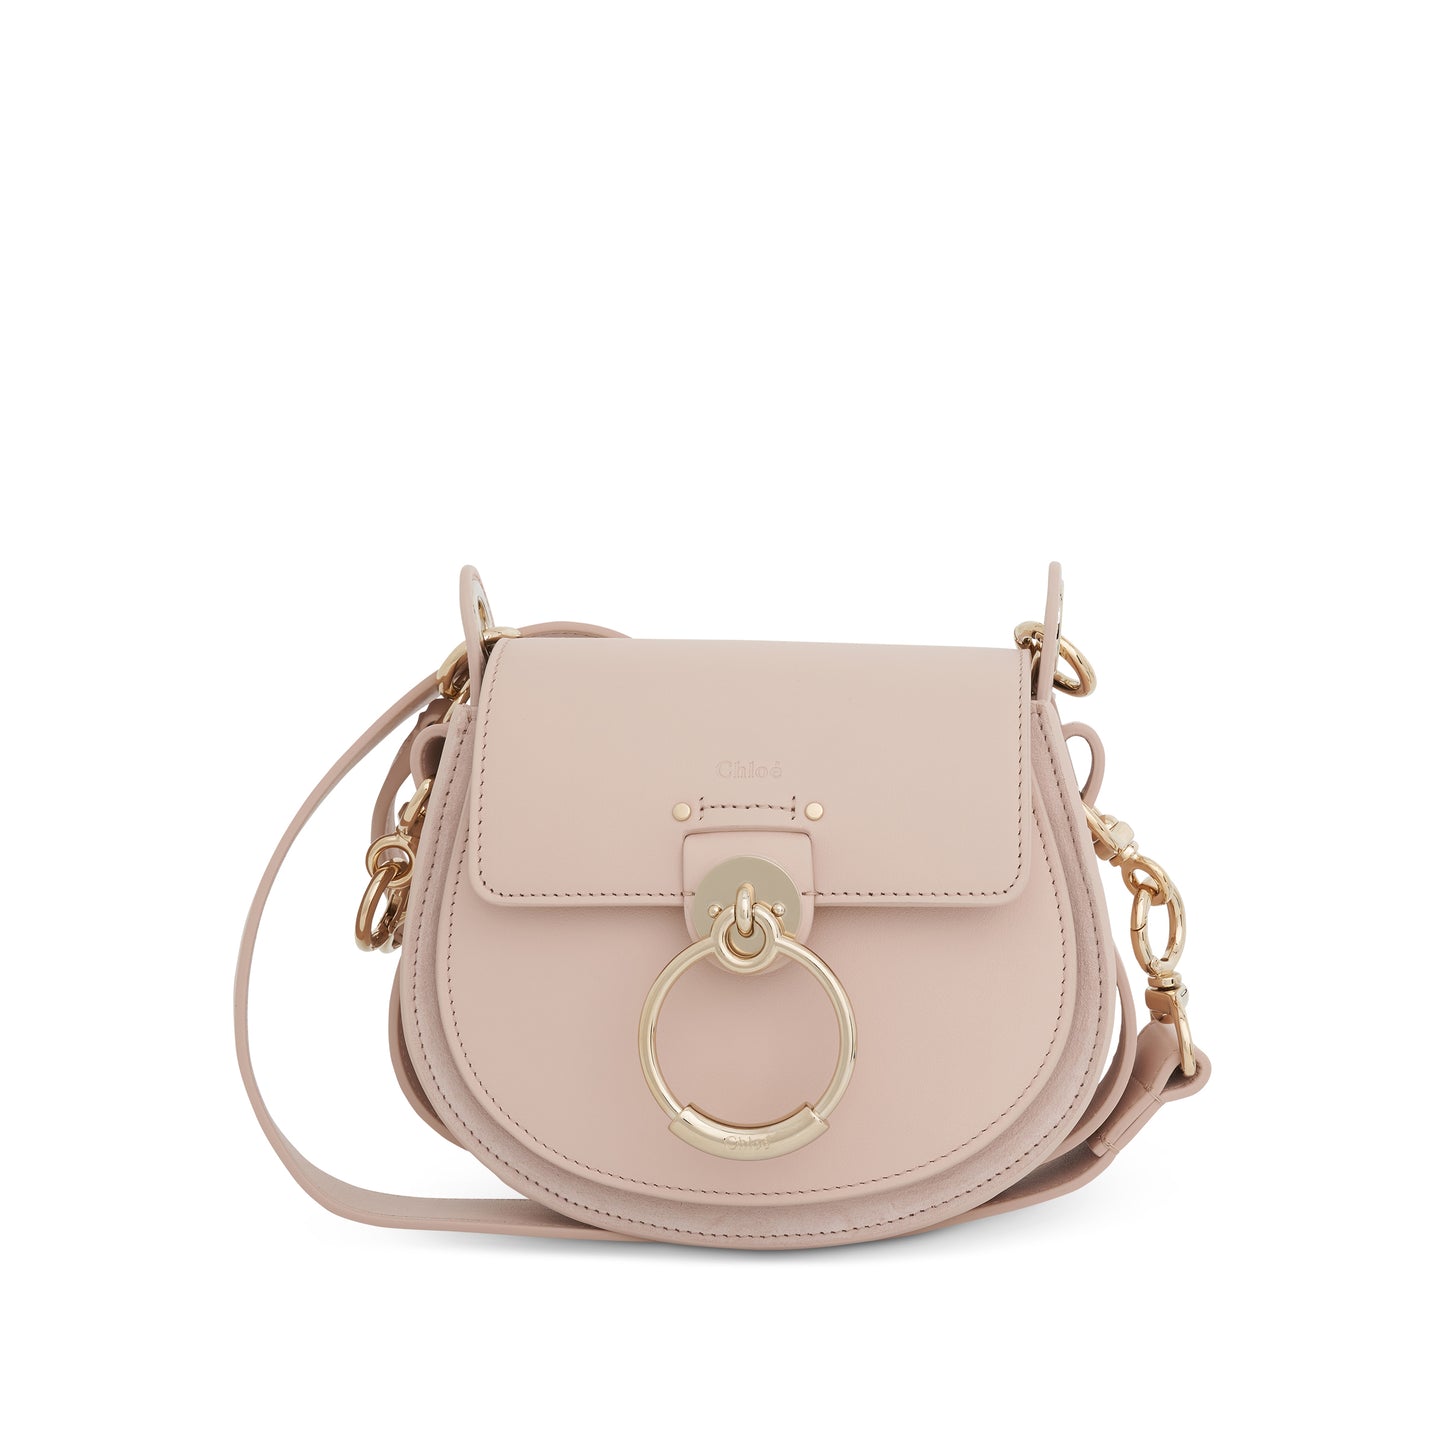 Tess Small Bag in Shiny and Suede Calfskin in Cement Pink